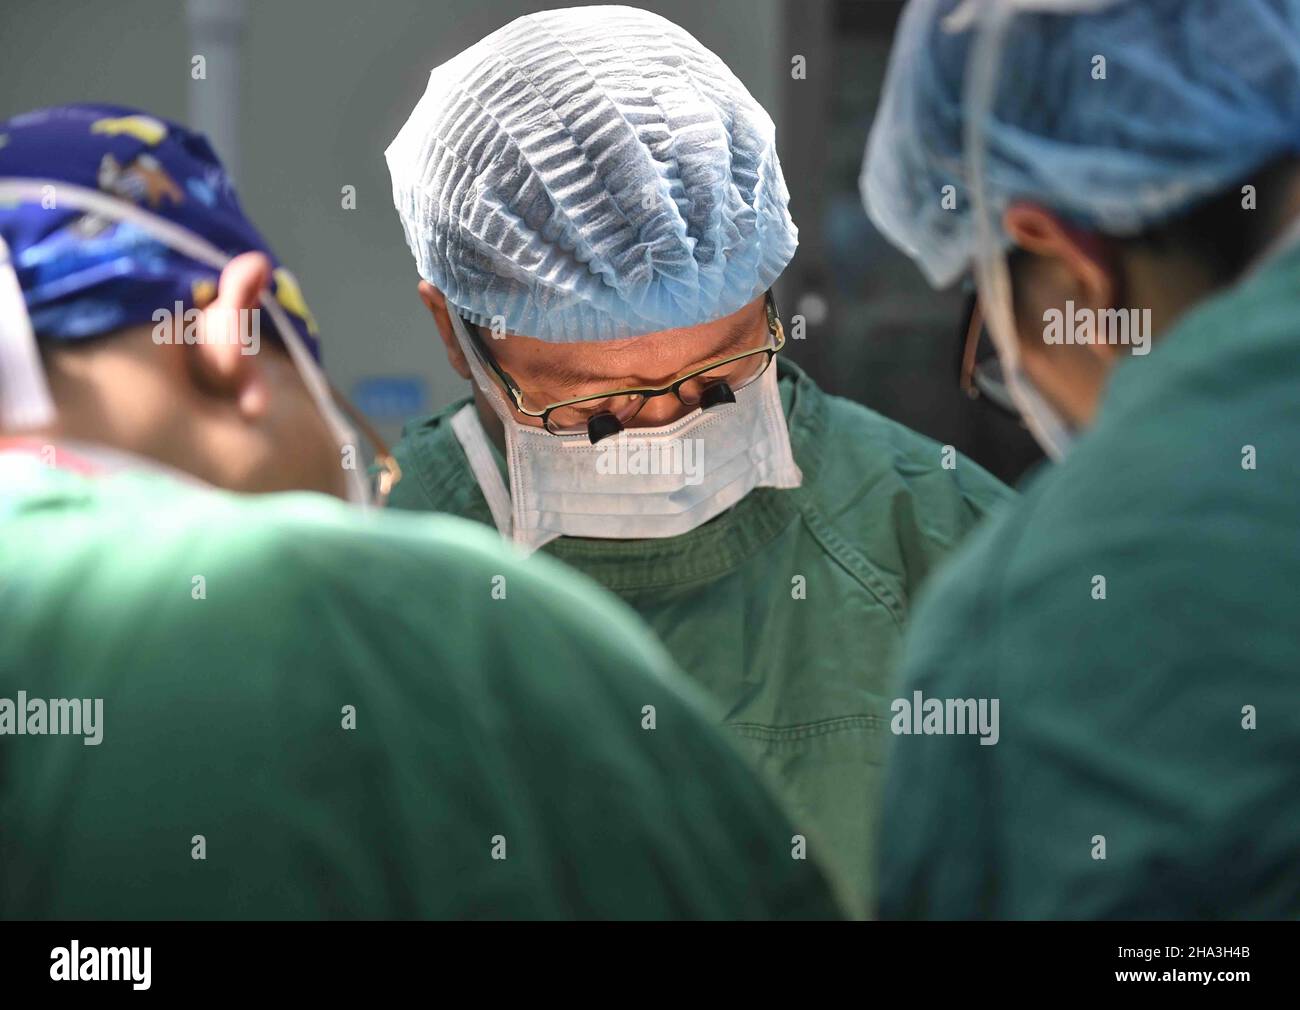 (211210) -- CHENGDU, Dec. 10, 2021 (Xinhua) -- Wang Wentao (C) uses the technology of extracorporeal hepatectomy plus liver autotransplantation in the treatment of a late-stage hydatid disease patient at a hospital in Tibetan Autonomous Prefecture of Garze, southwest China's Sichuan Province, Jan. 16, 2020.  Wang Wentao, deputy director of the liver surgery department at West China Hospital of Sichuan University, started his work on the prevention and control of hydatid disease in Tibetan Autonomous Prefecture of Garze in 2006 when he learned that some local people suffer from hydatid disease Stock Photo